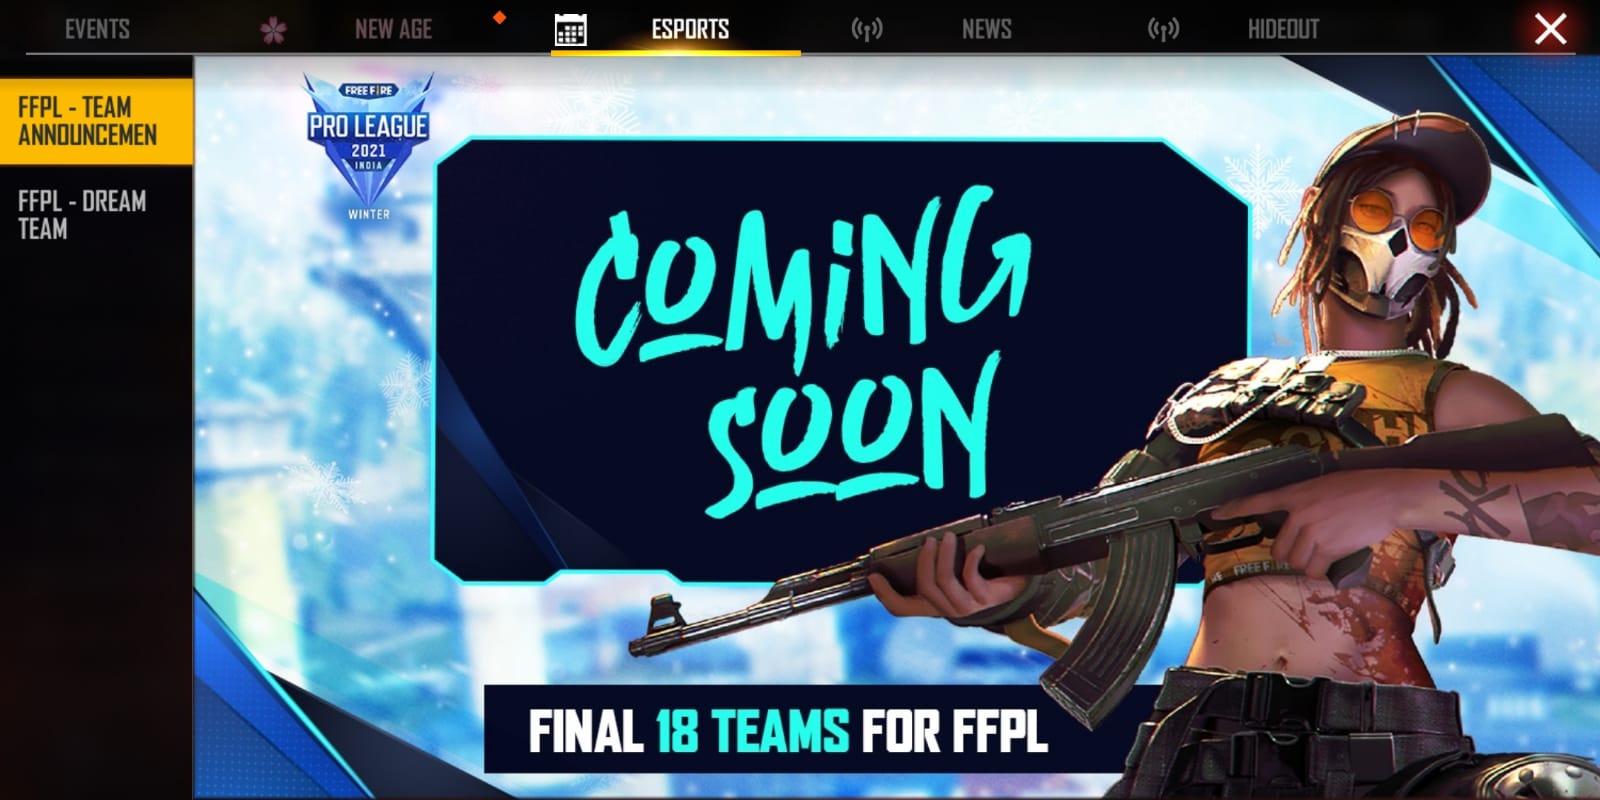 Liga Brasileira de Free Fire 2021 Series A Stage 3 - Free Fire -  Viewership, Overview, Prize Pool